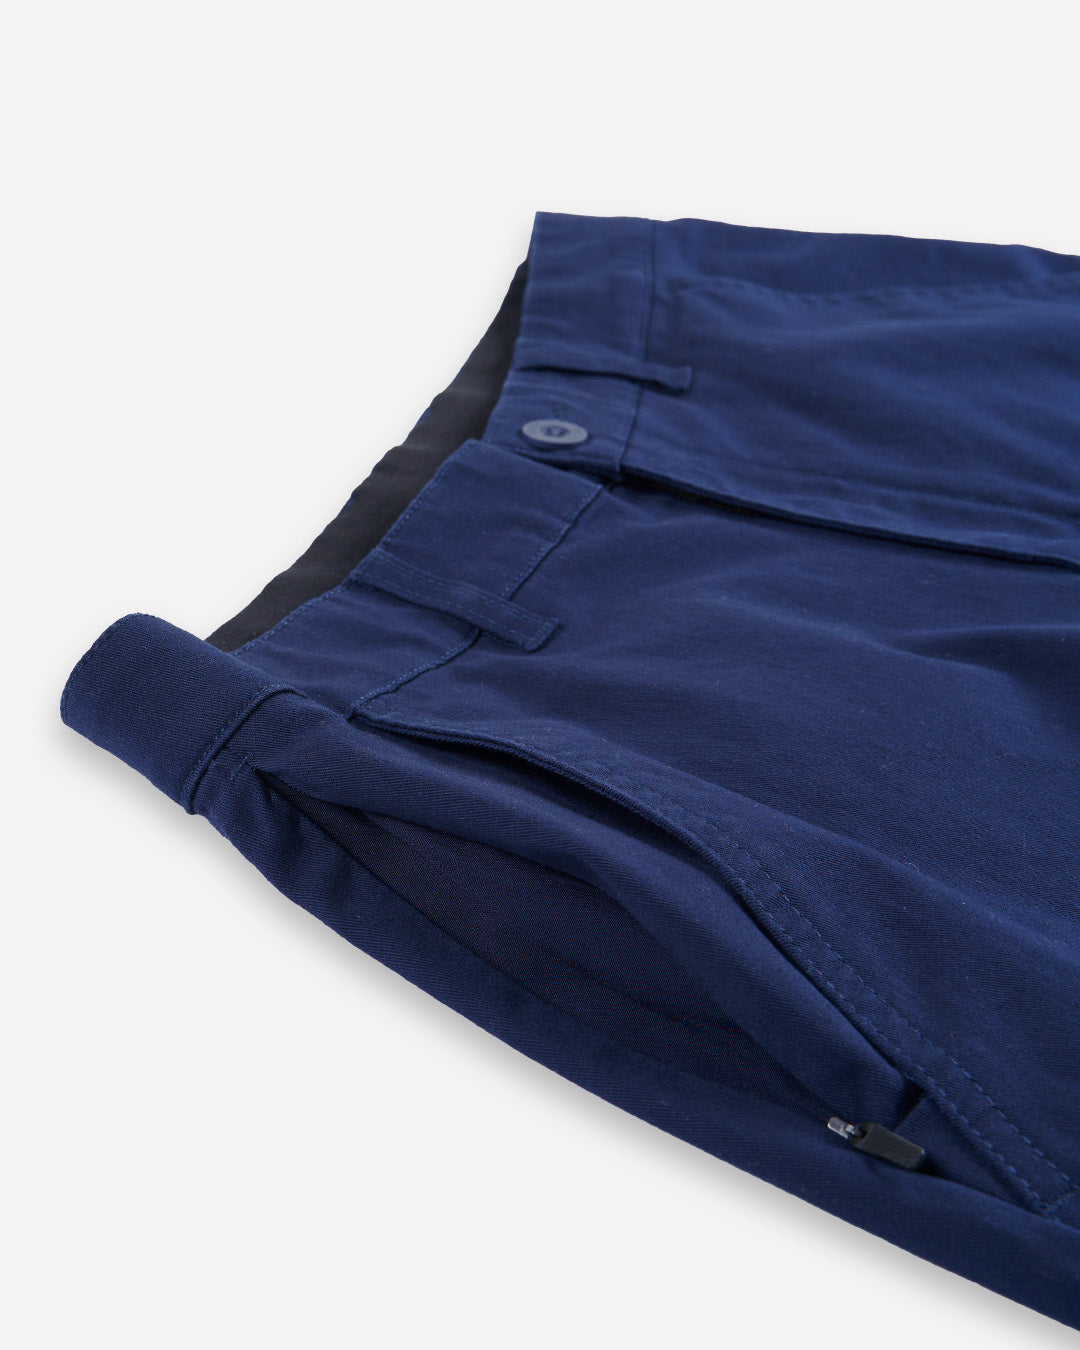 30" All Day Chino Pants